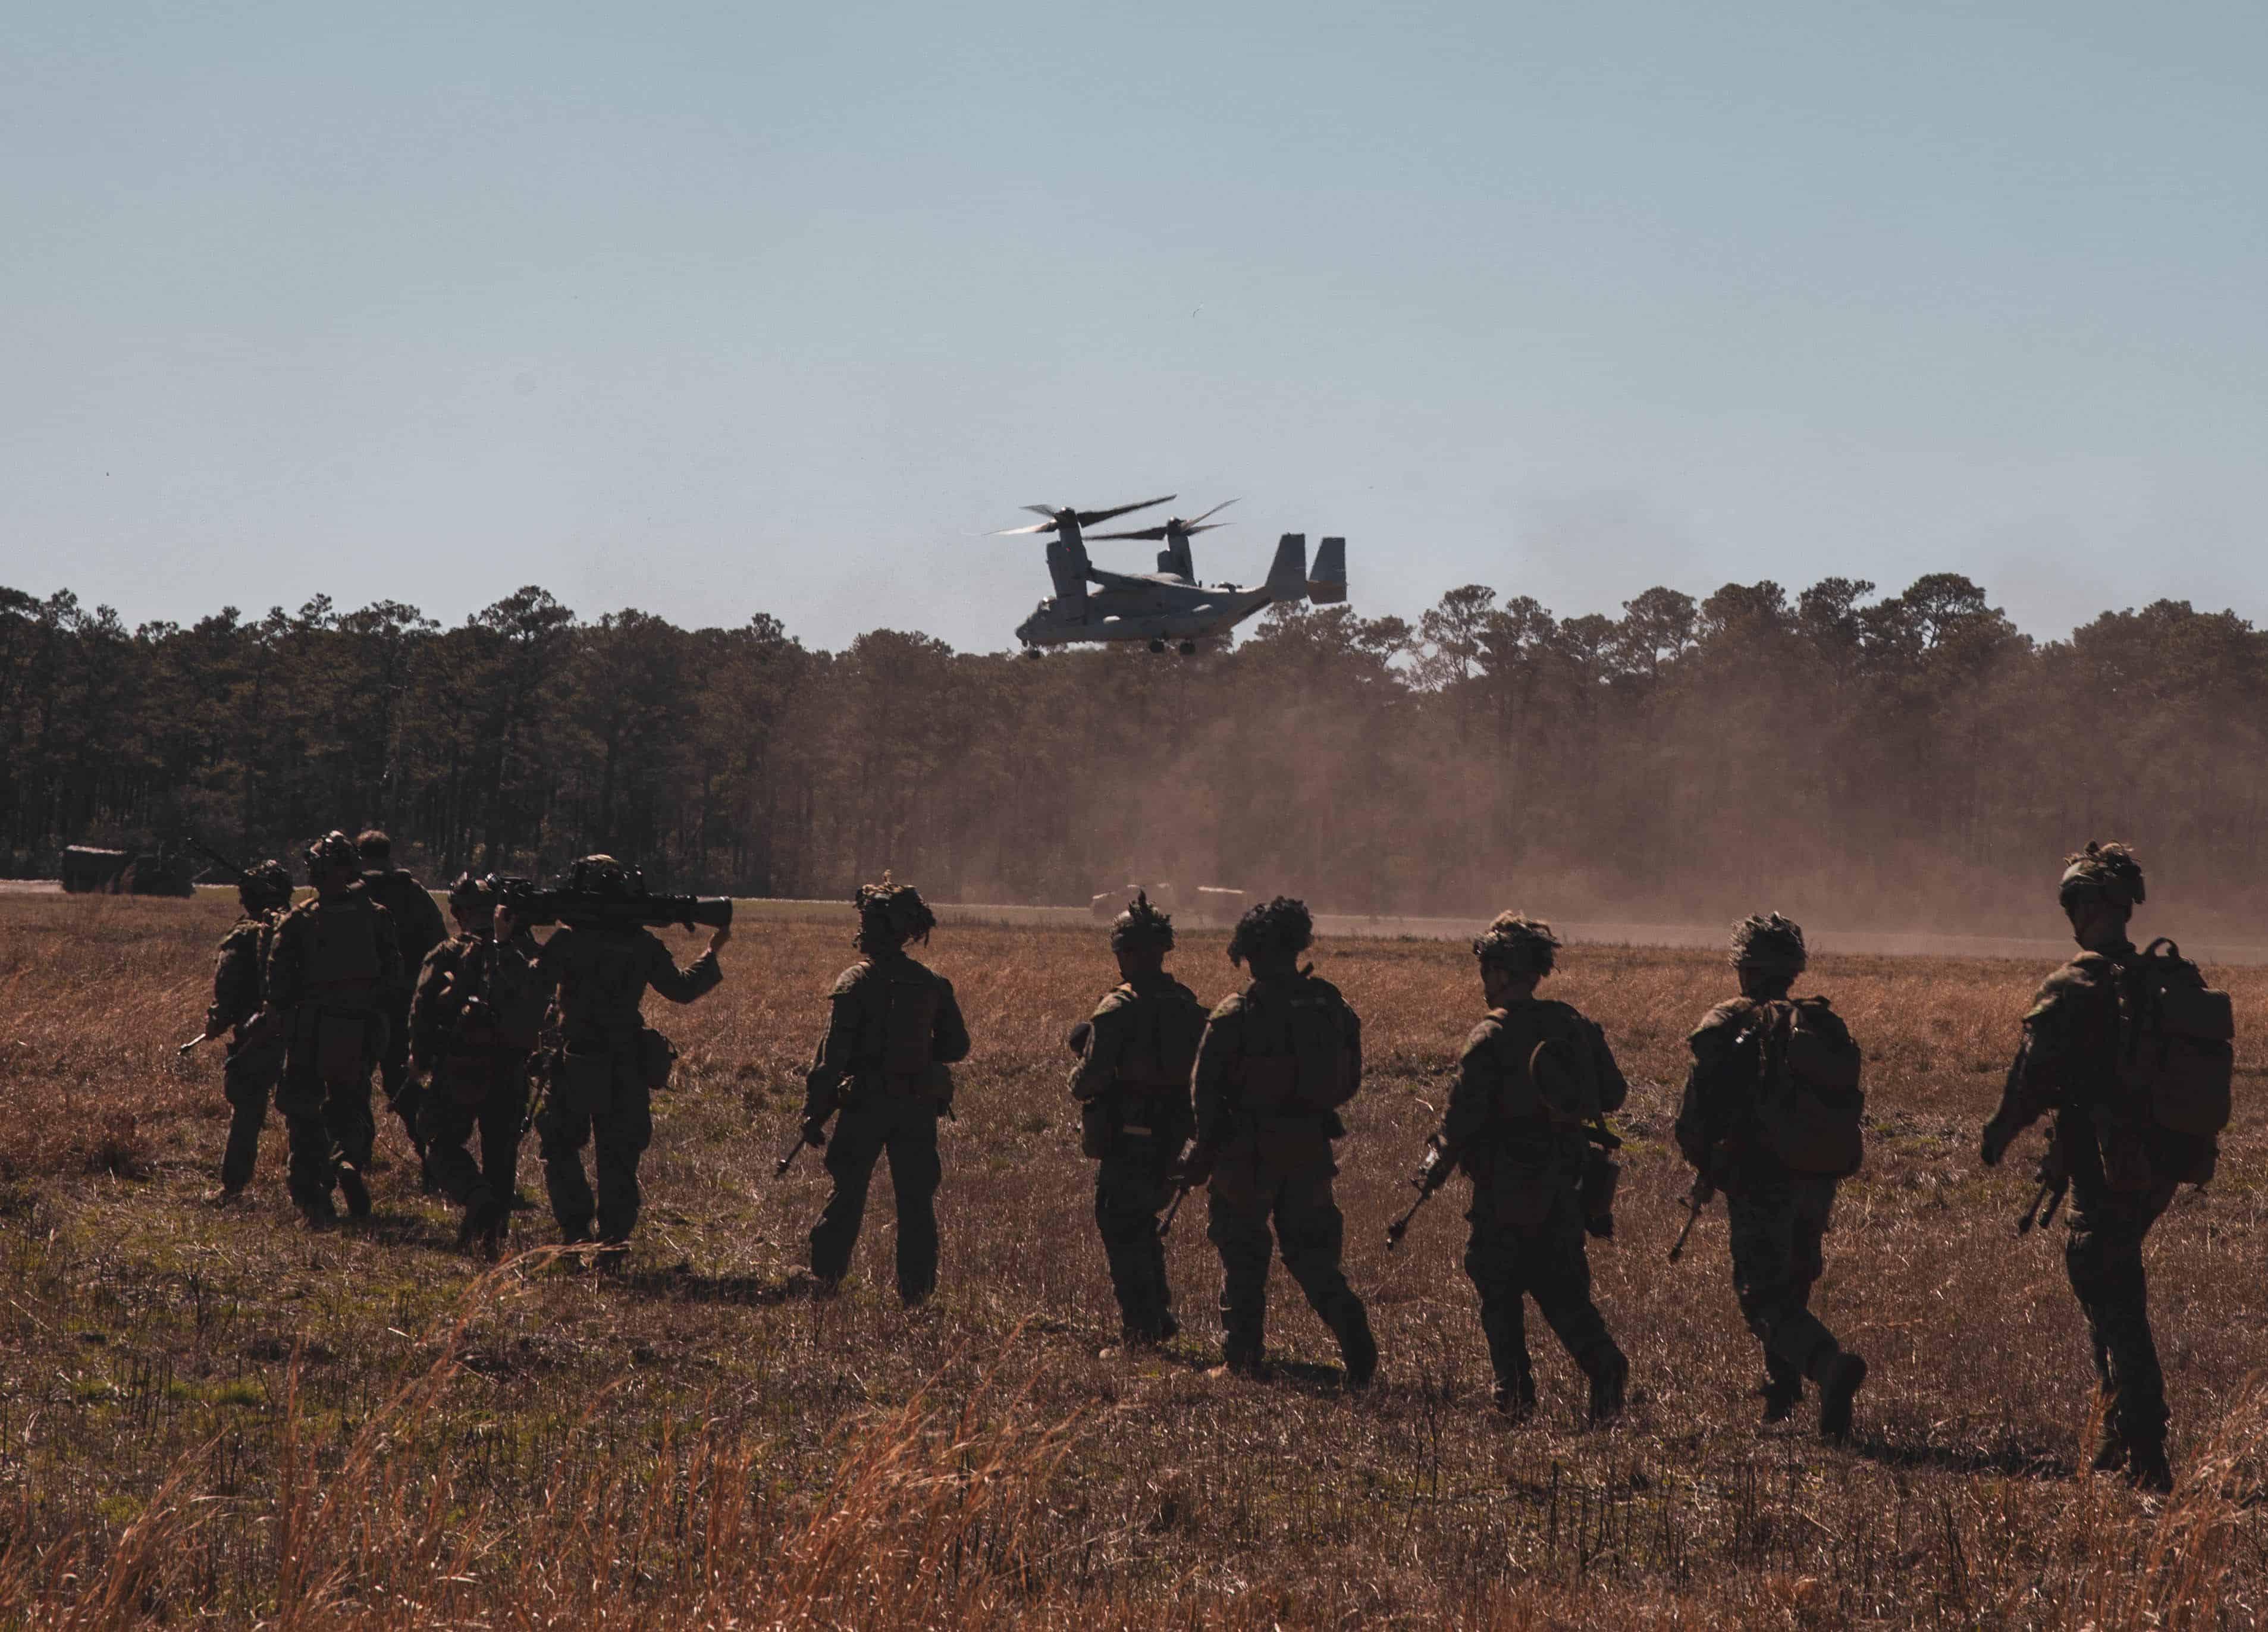 U.S. Marines with Alpha Company, Battalion Landing Team 1/6, 26th Marine Expeditionary Unit (MEU) prepare for takeoff as part of MEU Exercise III at Marine Corps Base Camp Lejeune, North Carolina,March 5, 2023. BLT 1/6 conducted a simulated airfield seizure to mark the beginning of the exercise. (U.S. Marine Corps photo by Cpl. Aziza Kamuhanda)